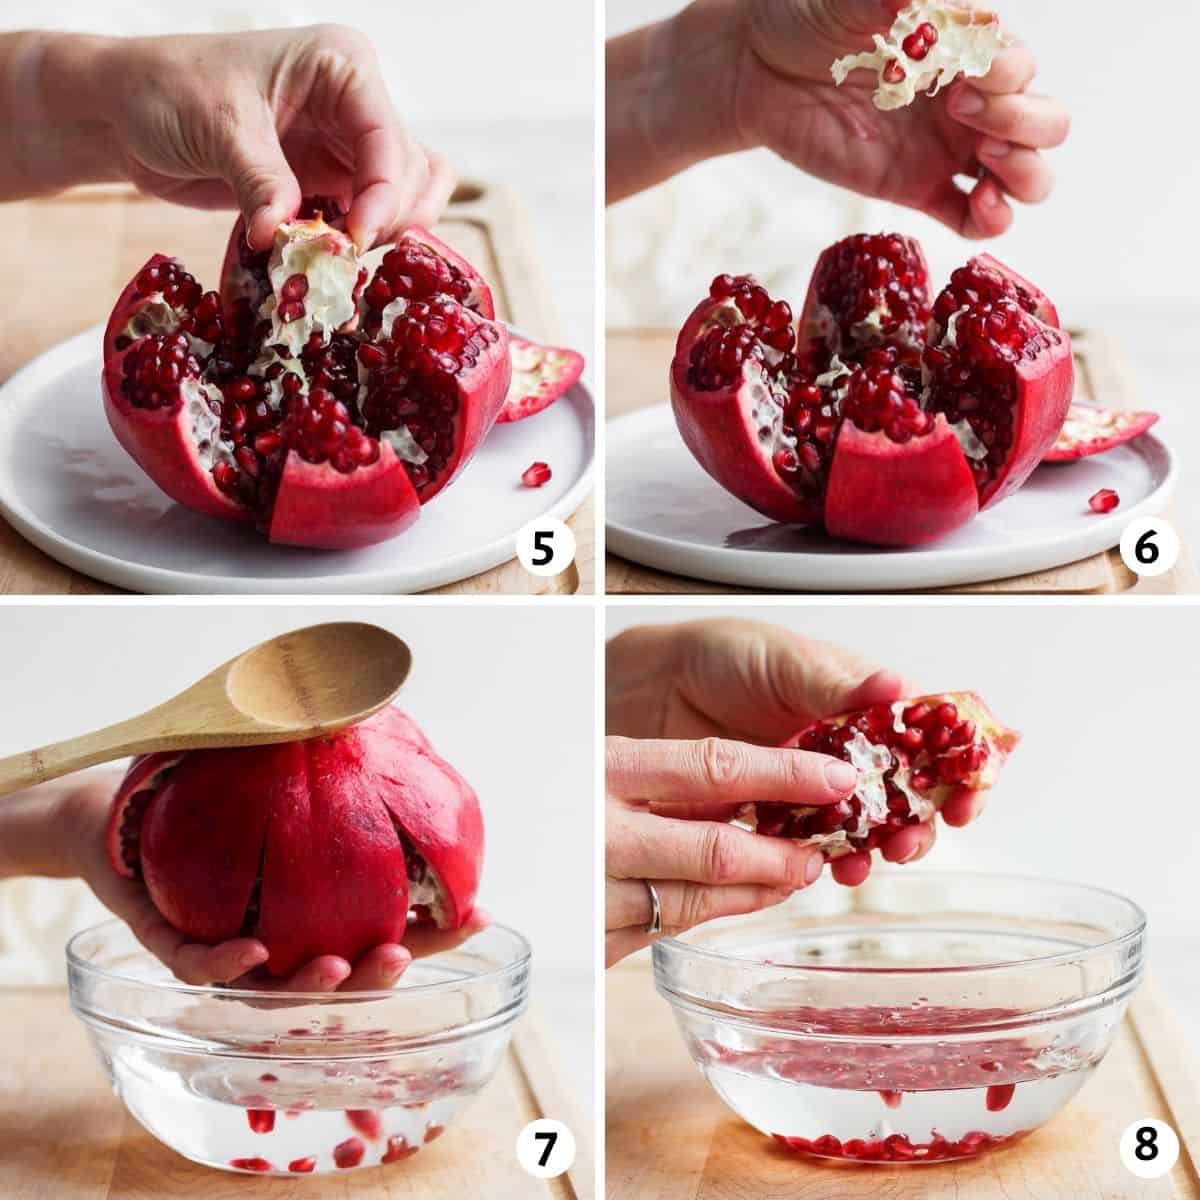 4 image collage to show how to remove the white pith and deseed the fruit